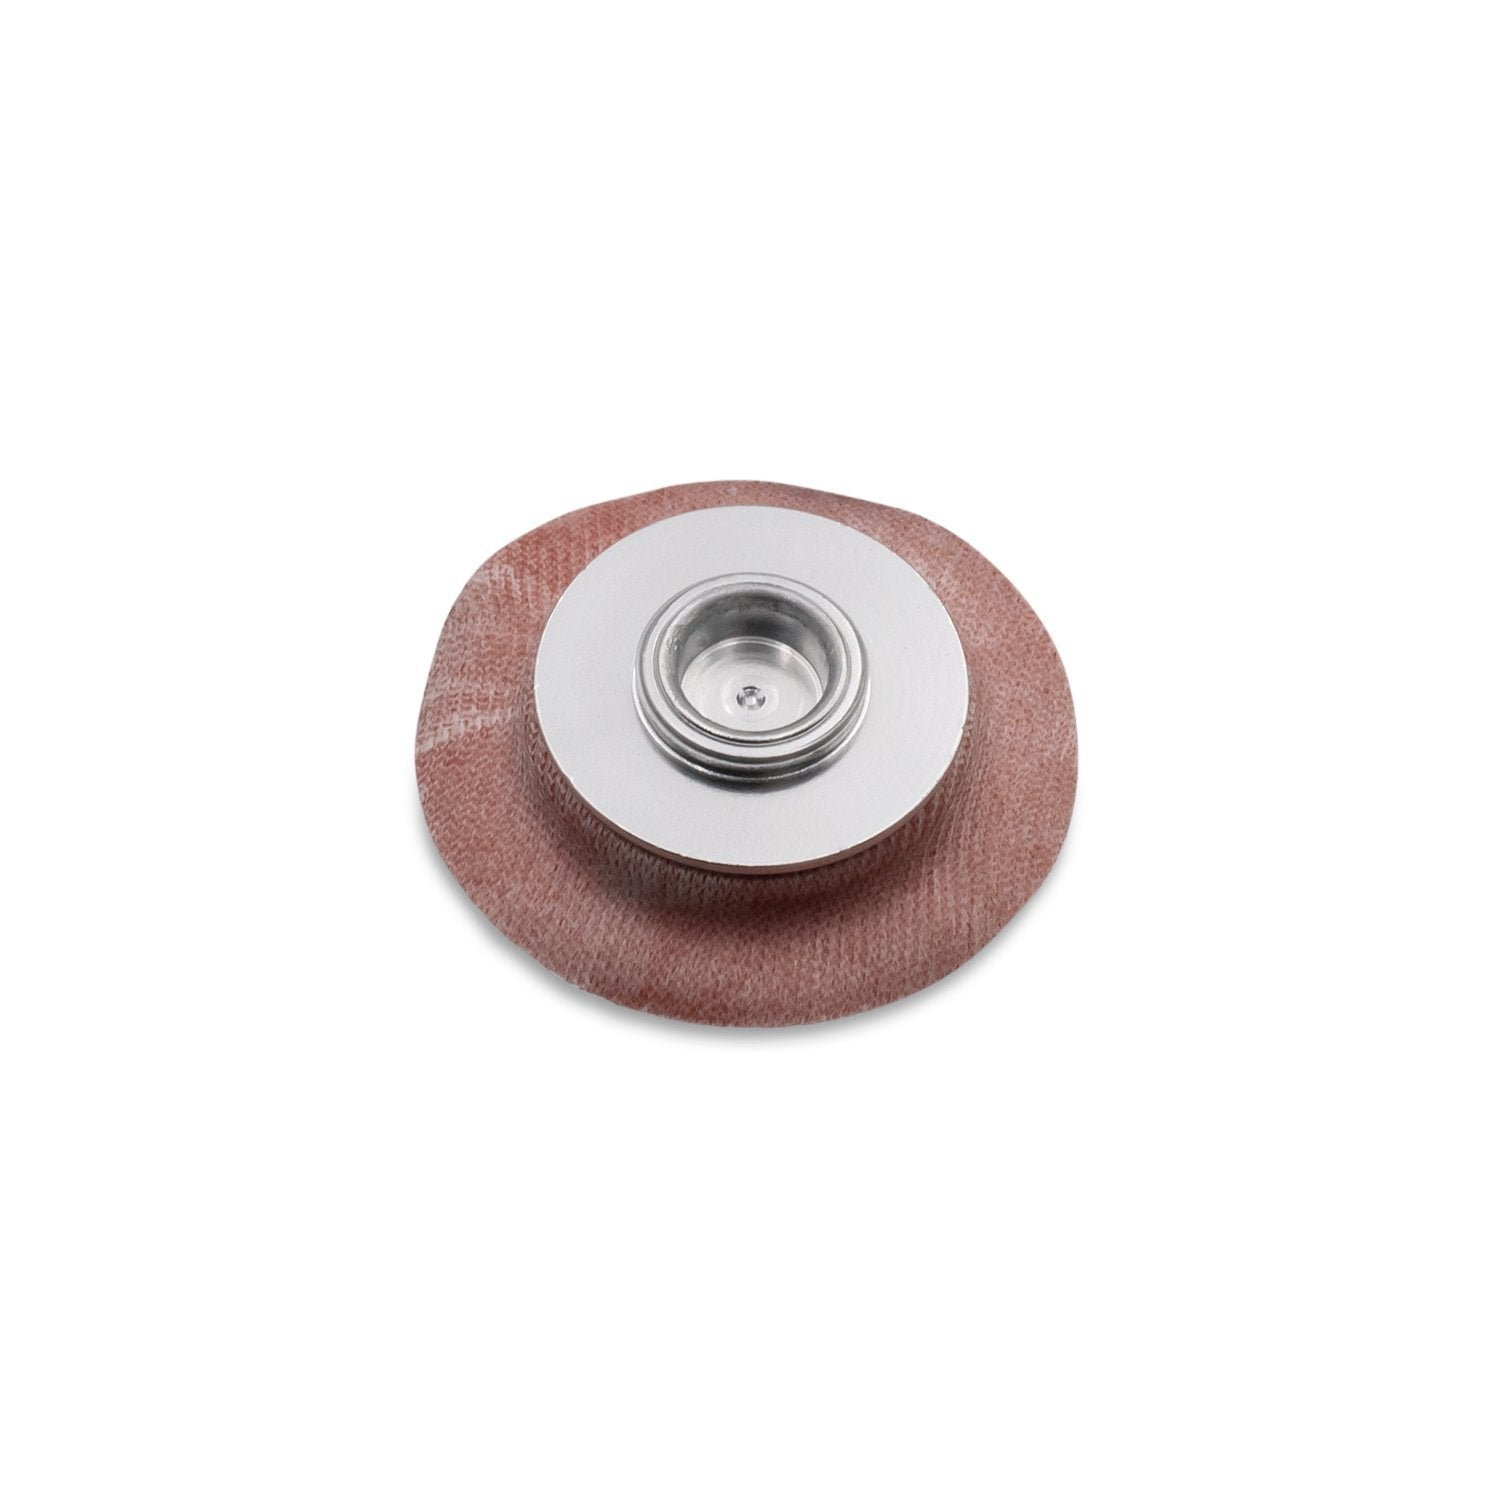 Replacement Diaphragm for 2-Port and 3-Port FPRs - BLOX Racing